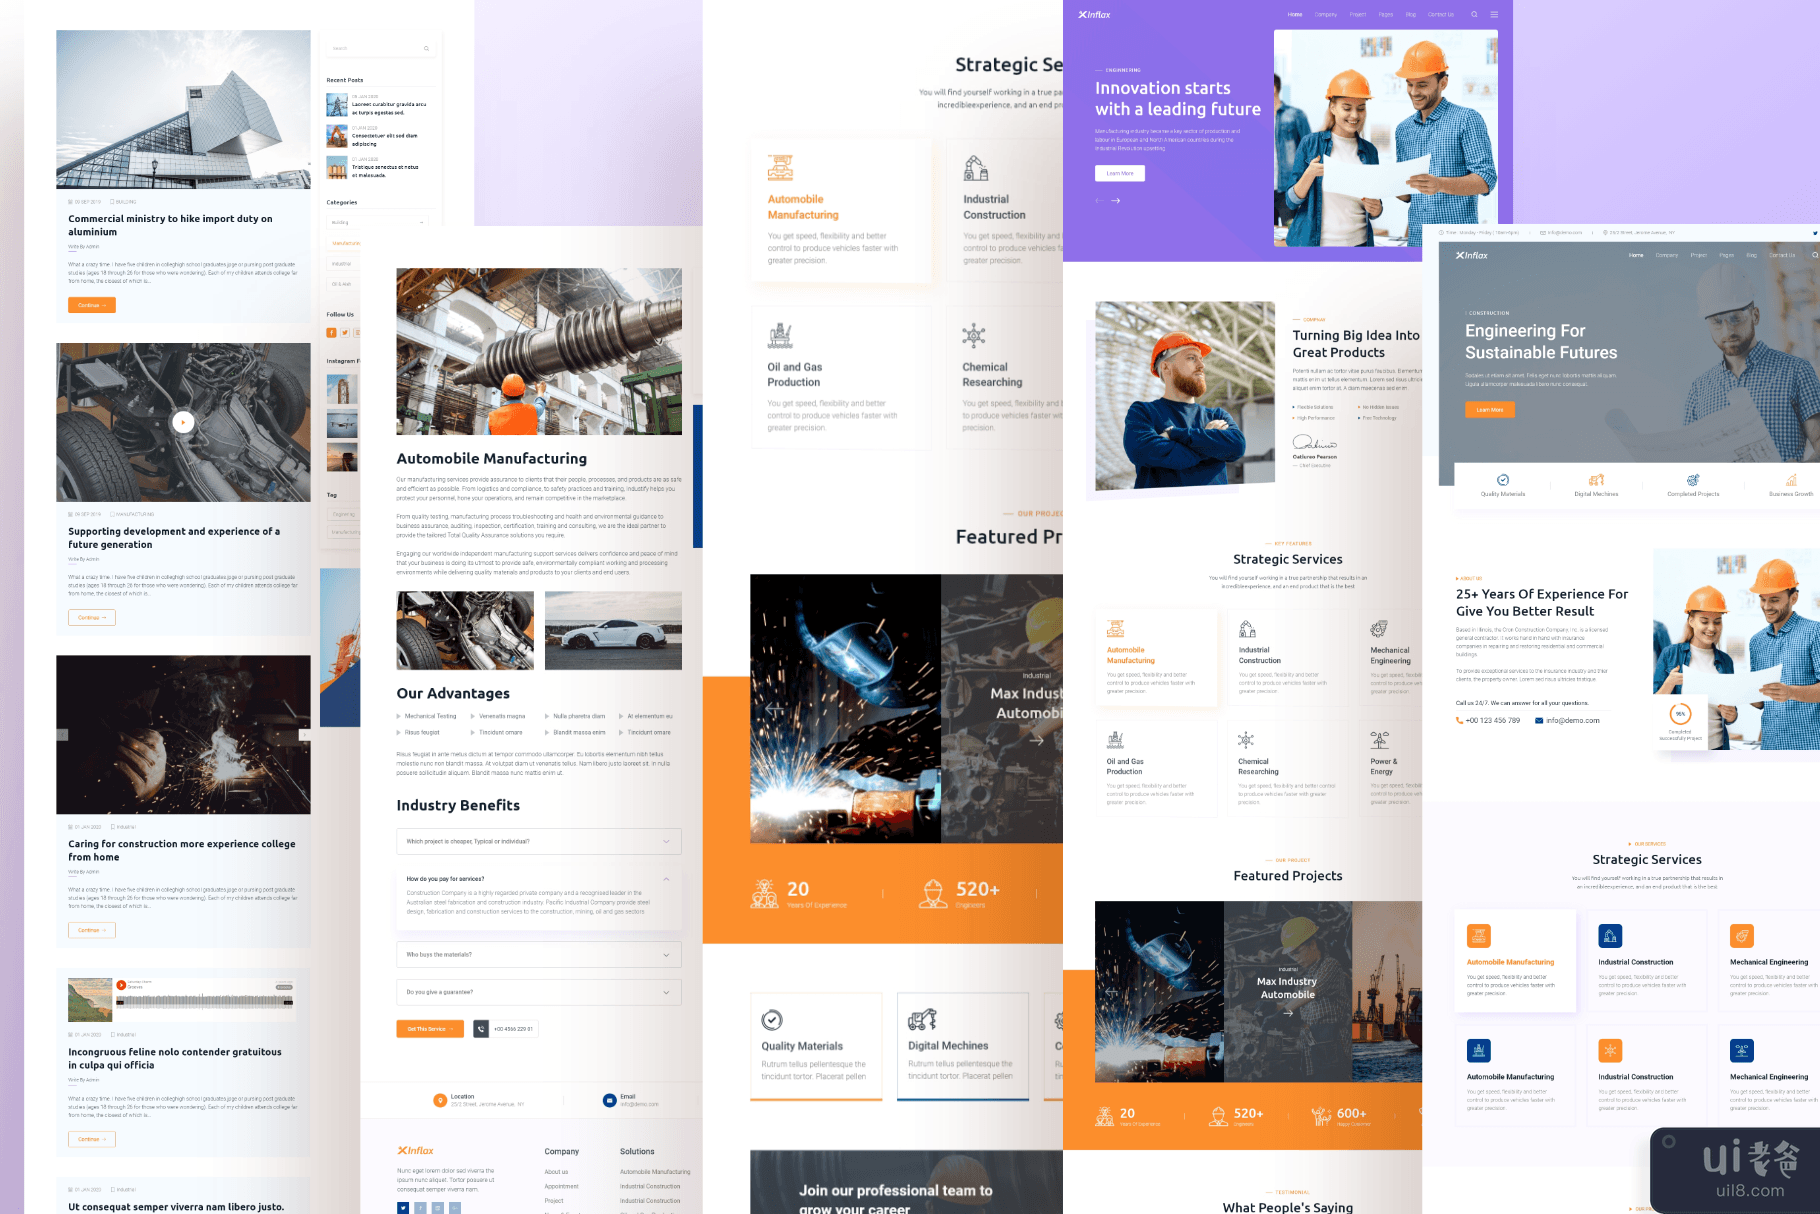 Xinflax - 工业 Adobe XD 模板(Xinflax - Industrial Adobe XD Template)插图2